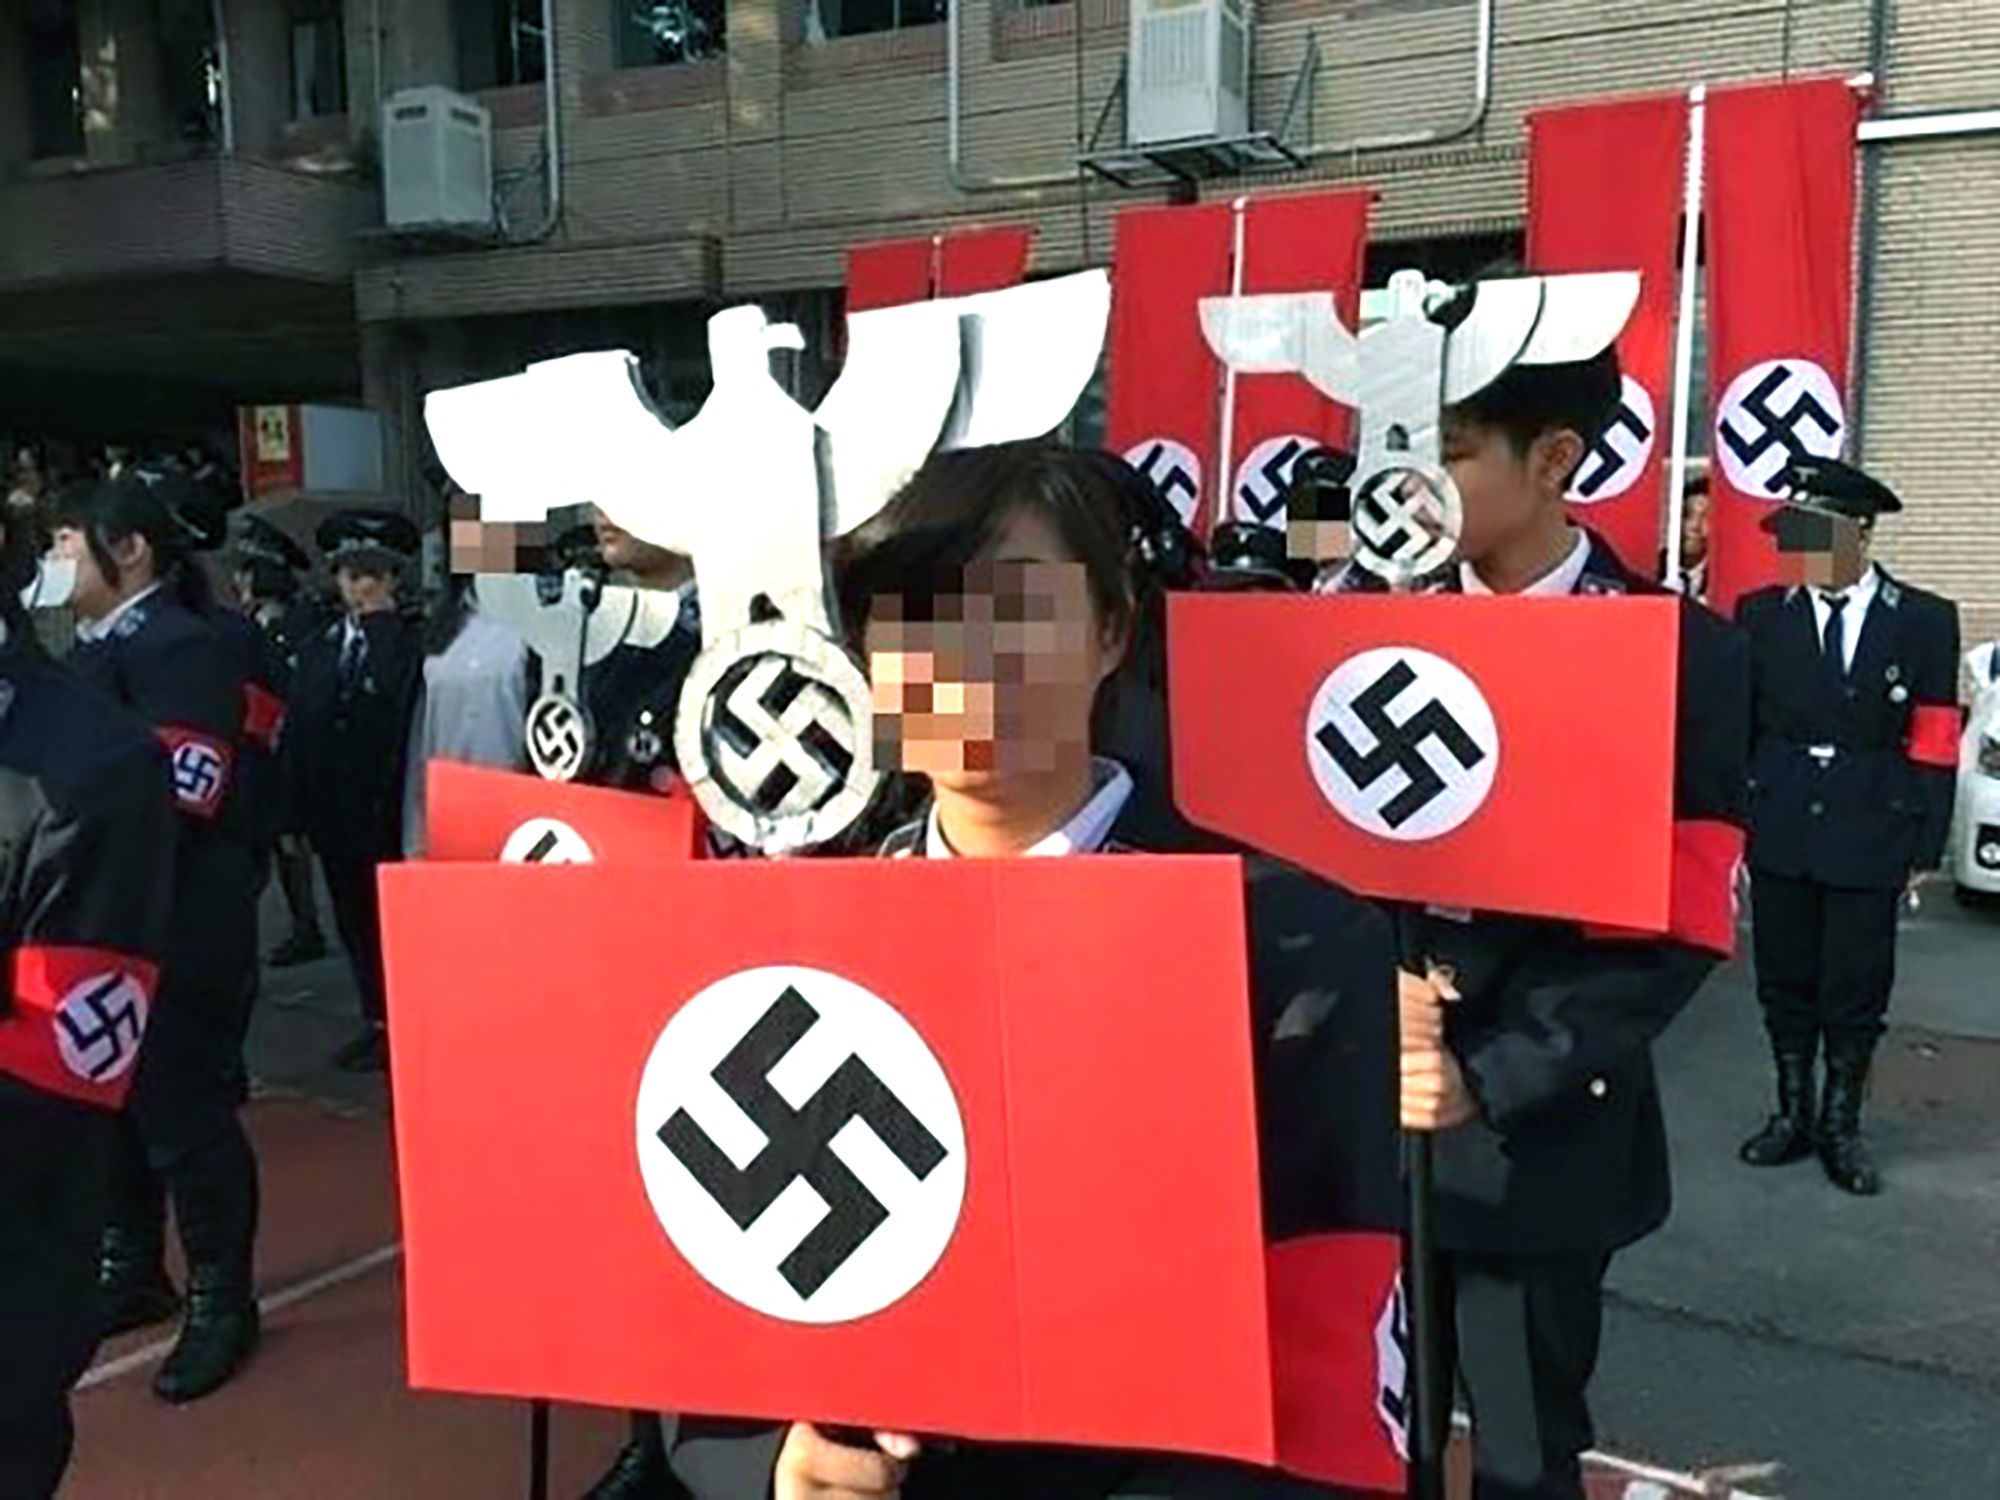 Nazi-chic': Why dressing up in Nazi uniforms isn't as controversial in Asia  | CNN